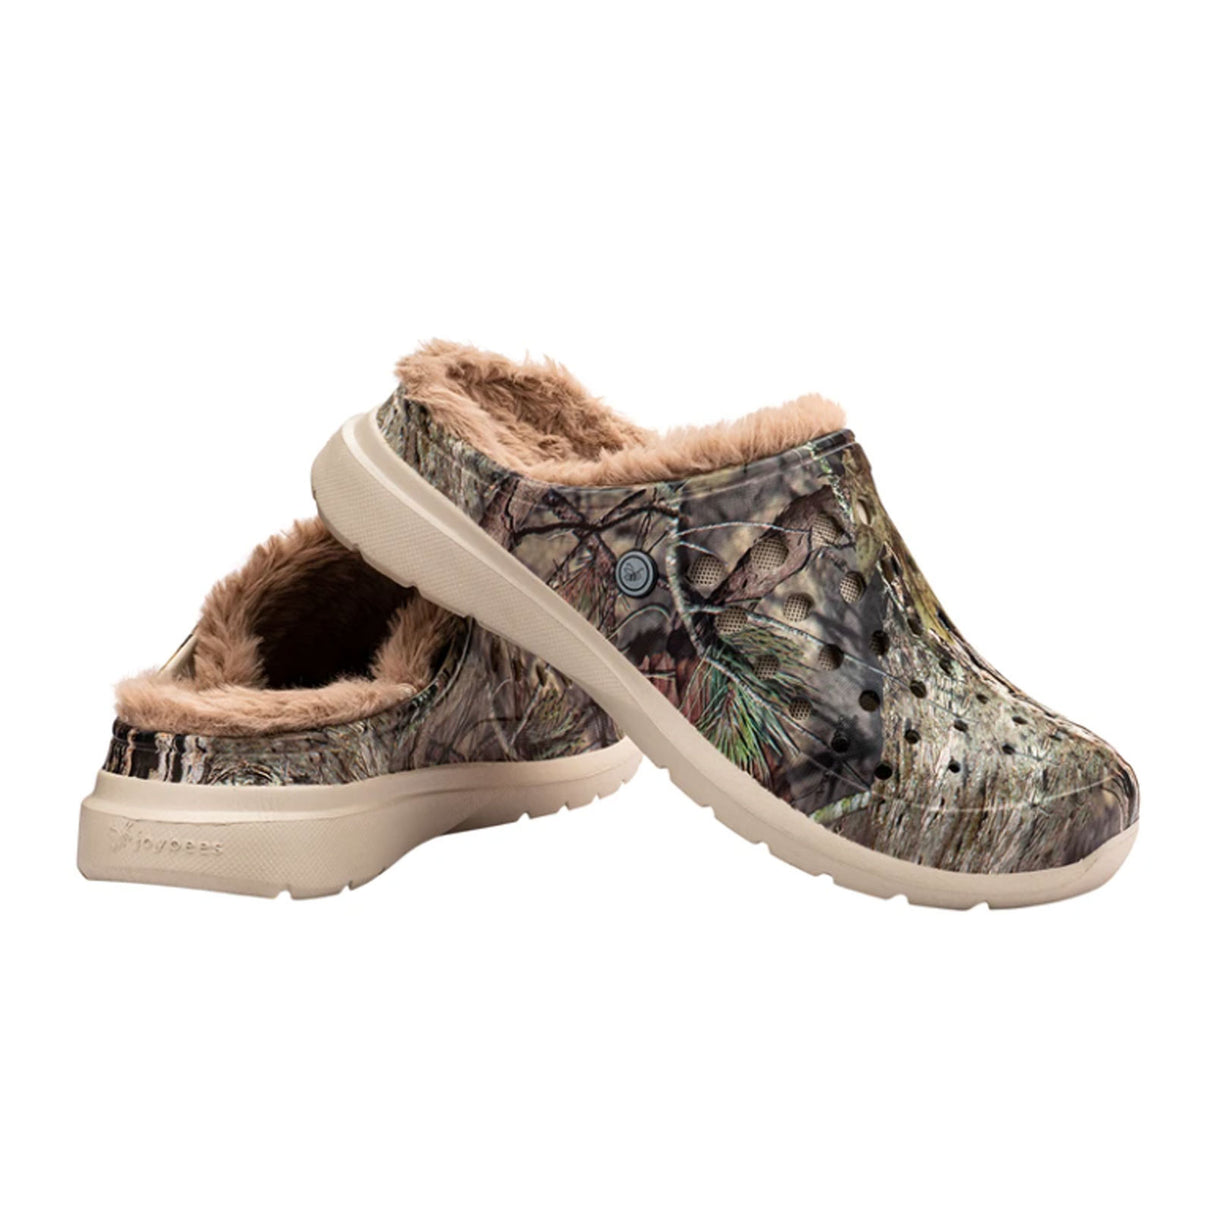 Joybees Cozy Lined Clog (Unisex) - Mossy Oak/Light Brown Sandals - Clog - The Heel Shoe Fitters